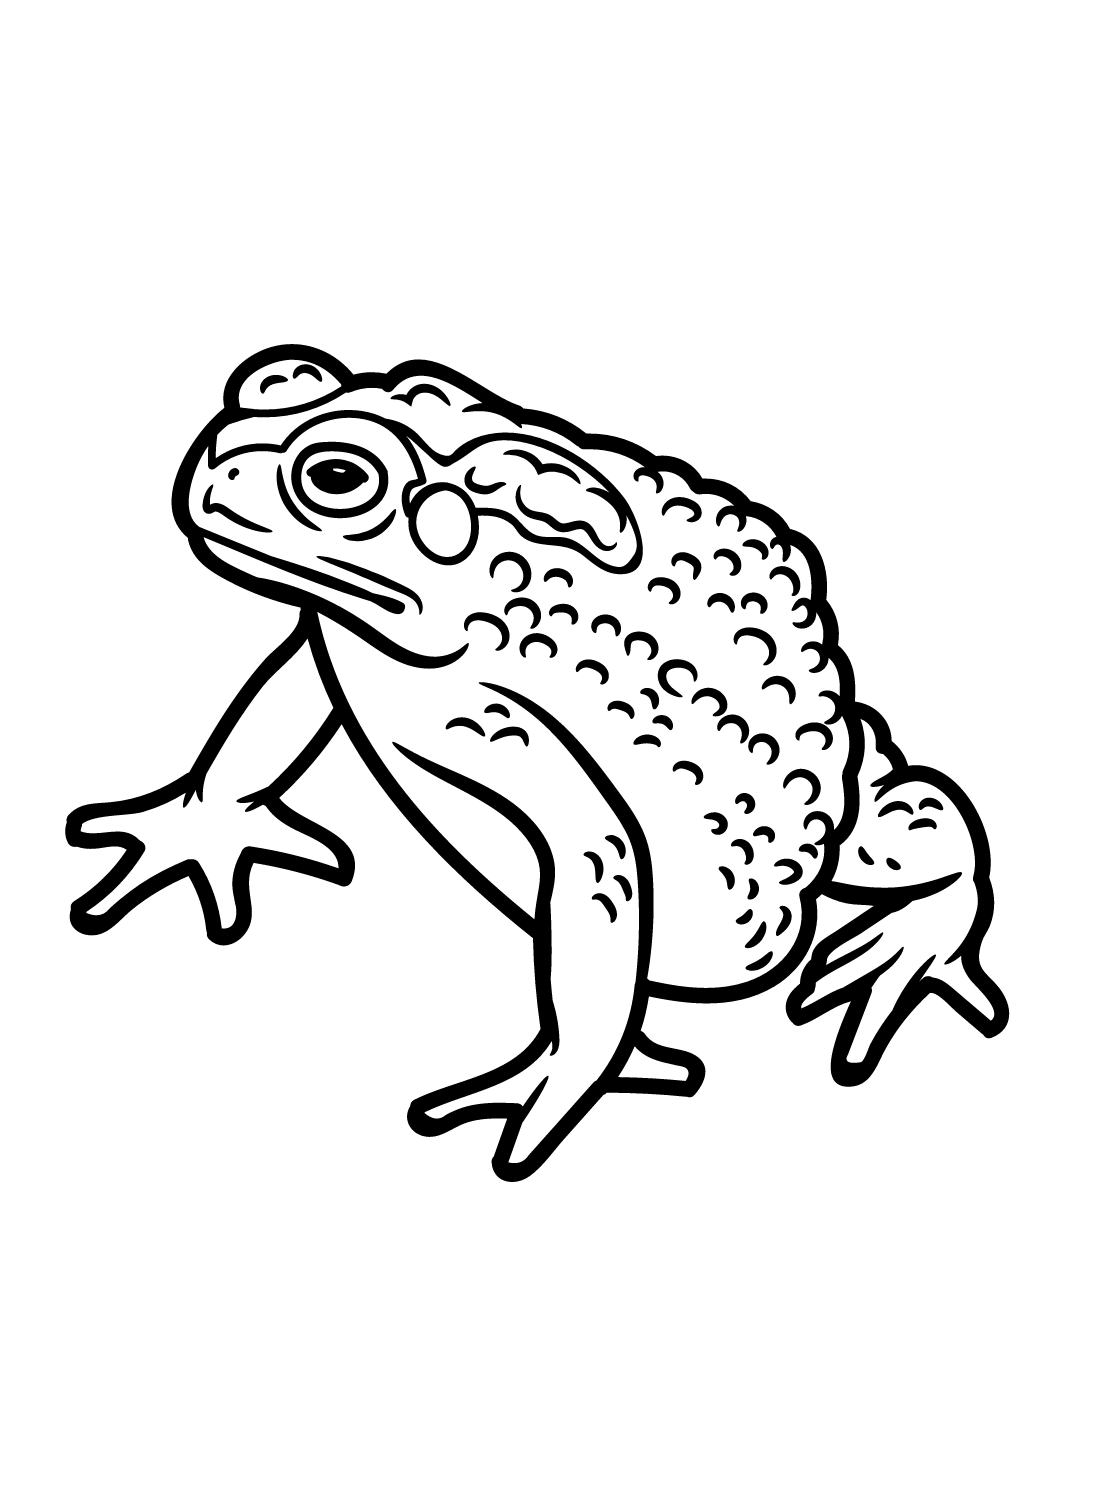 Toad Free Coloring Page